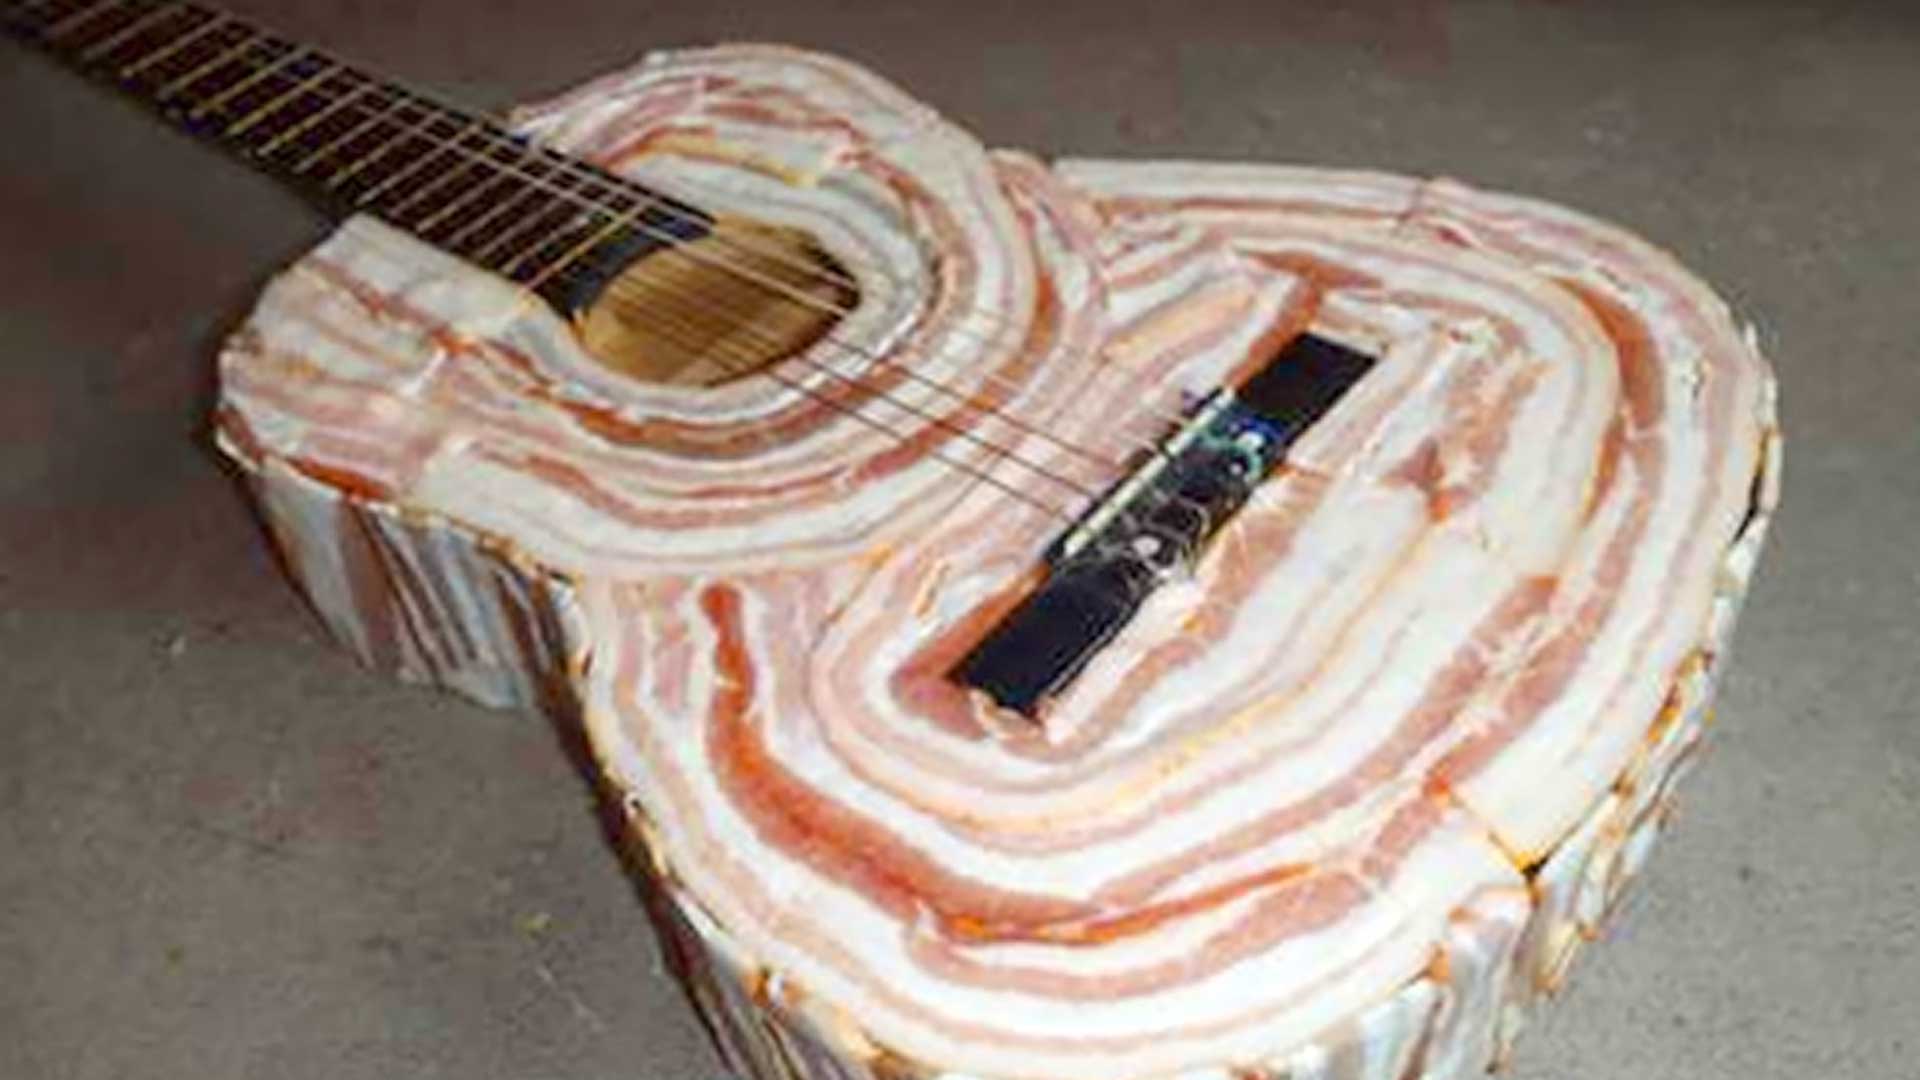 This Acoustic Bacon Guitar Looks Delicious... Even Though It's Raw